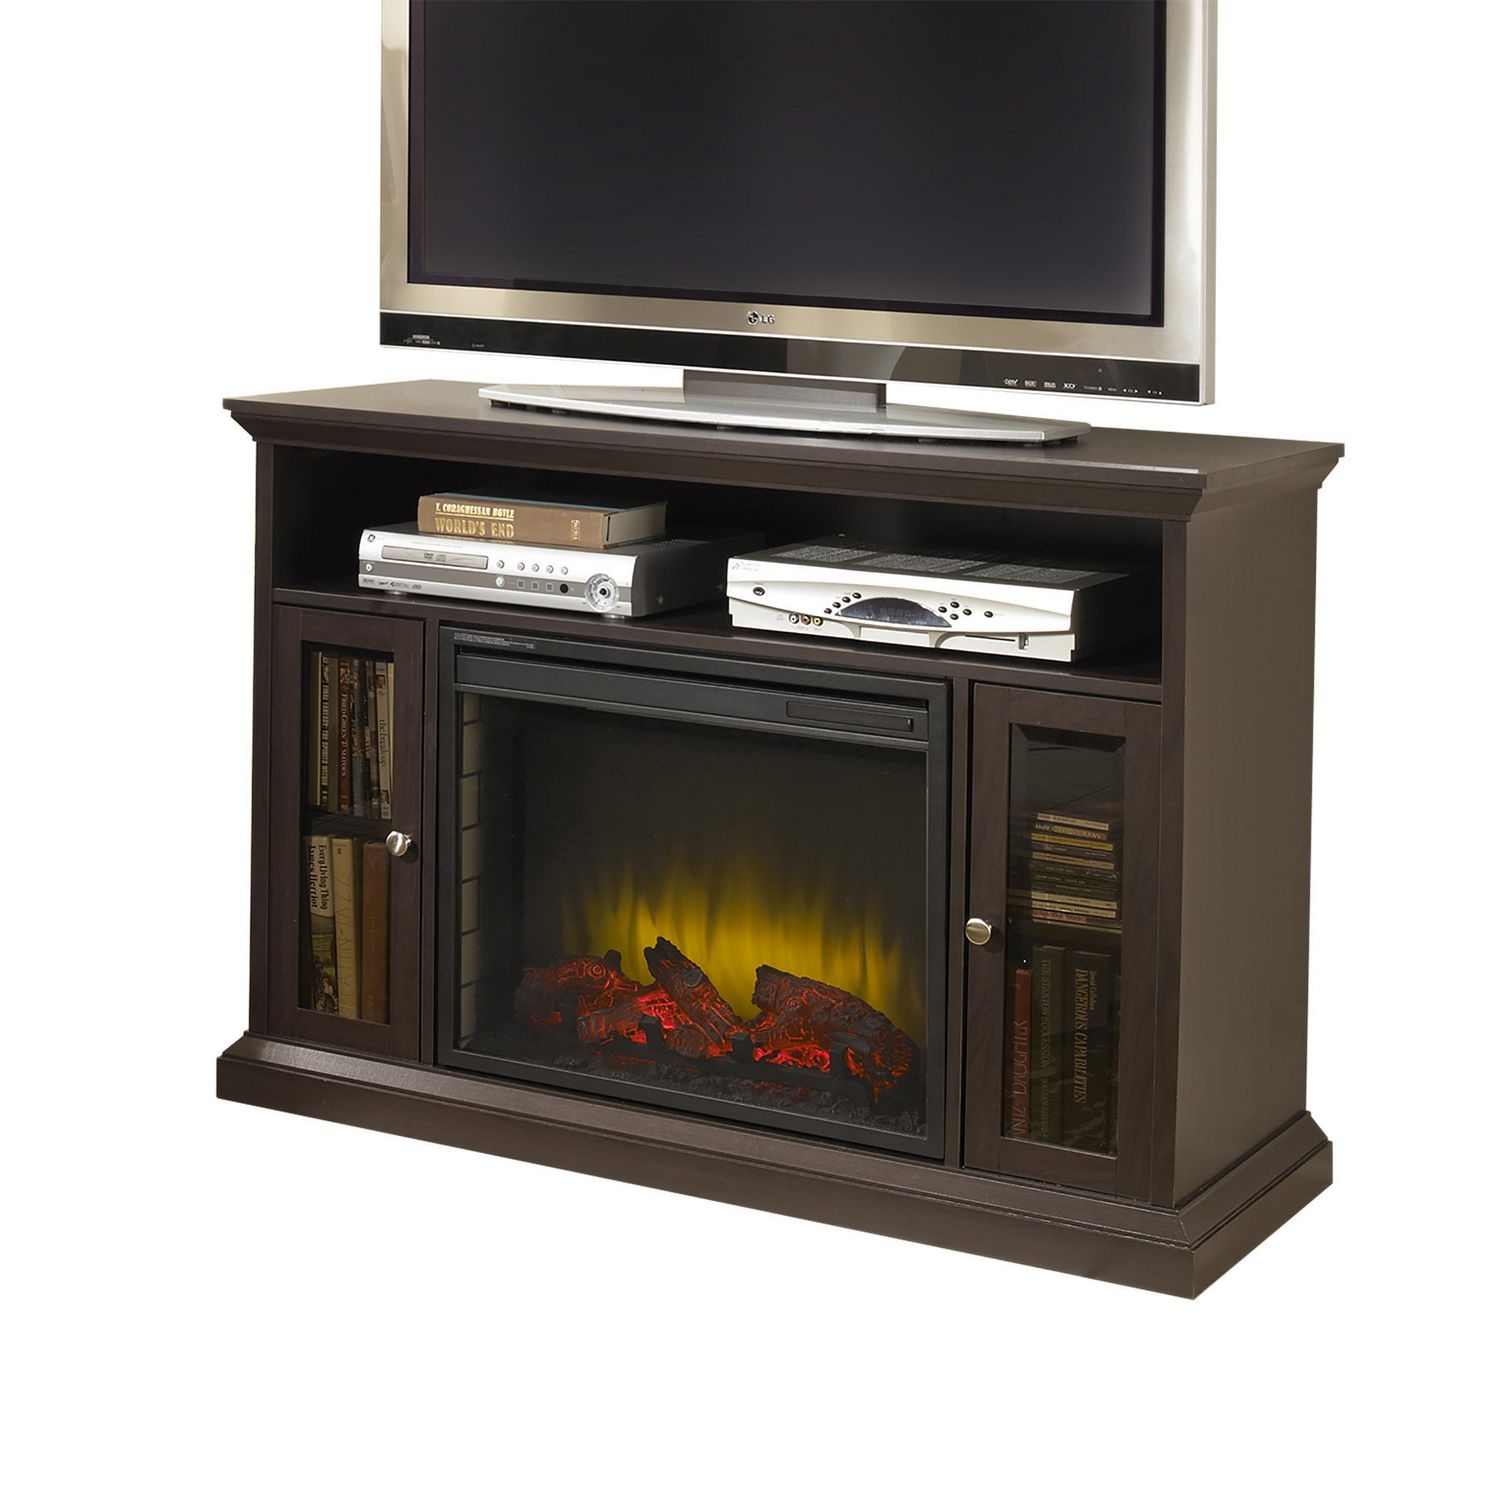 Best Fireplace Tv Stand Elegant Menards Electric Fireplace Charming Fireplace